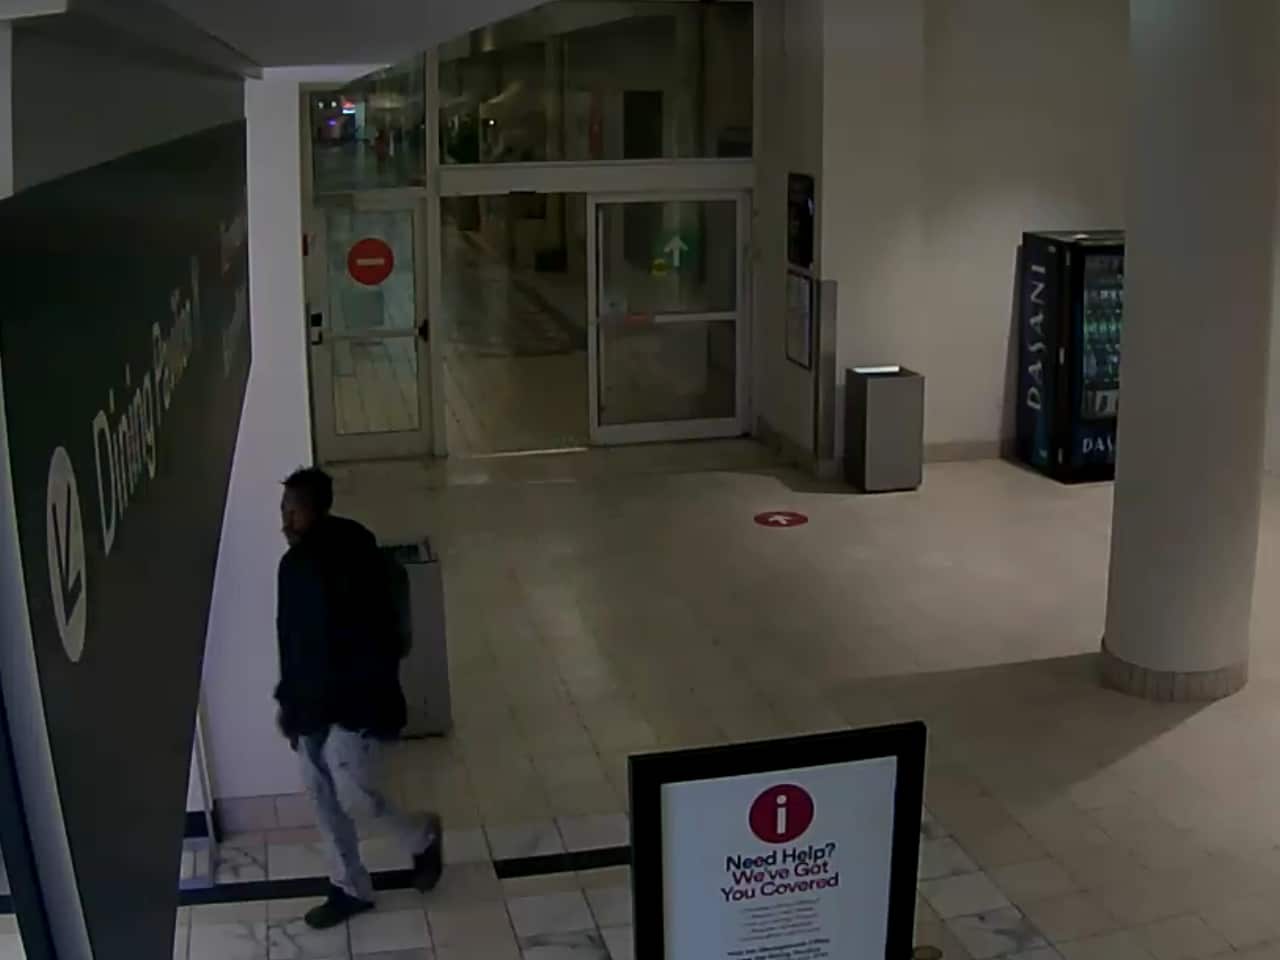 Police search for suspect in sexual assault near Lenox Square